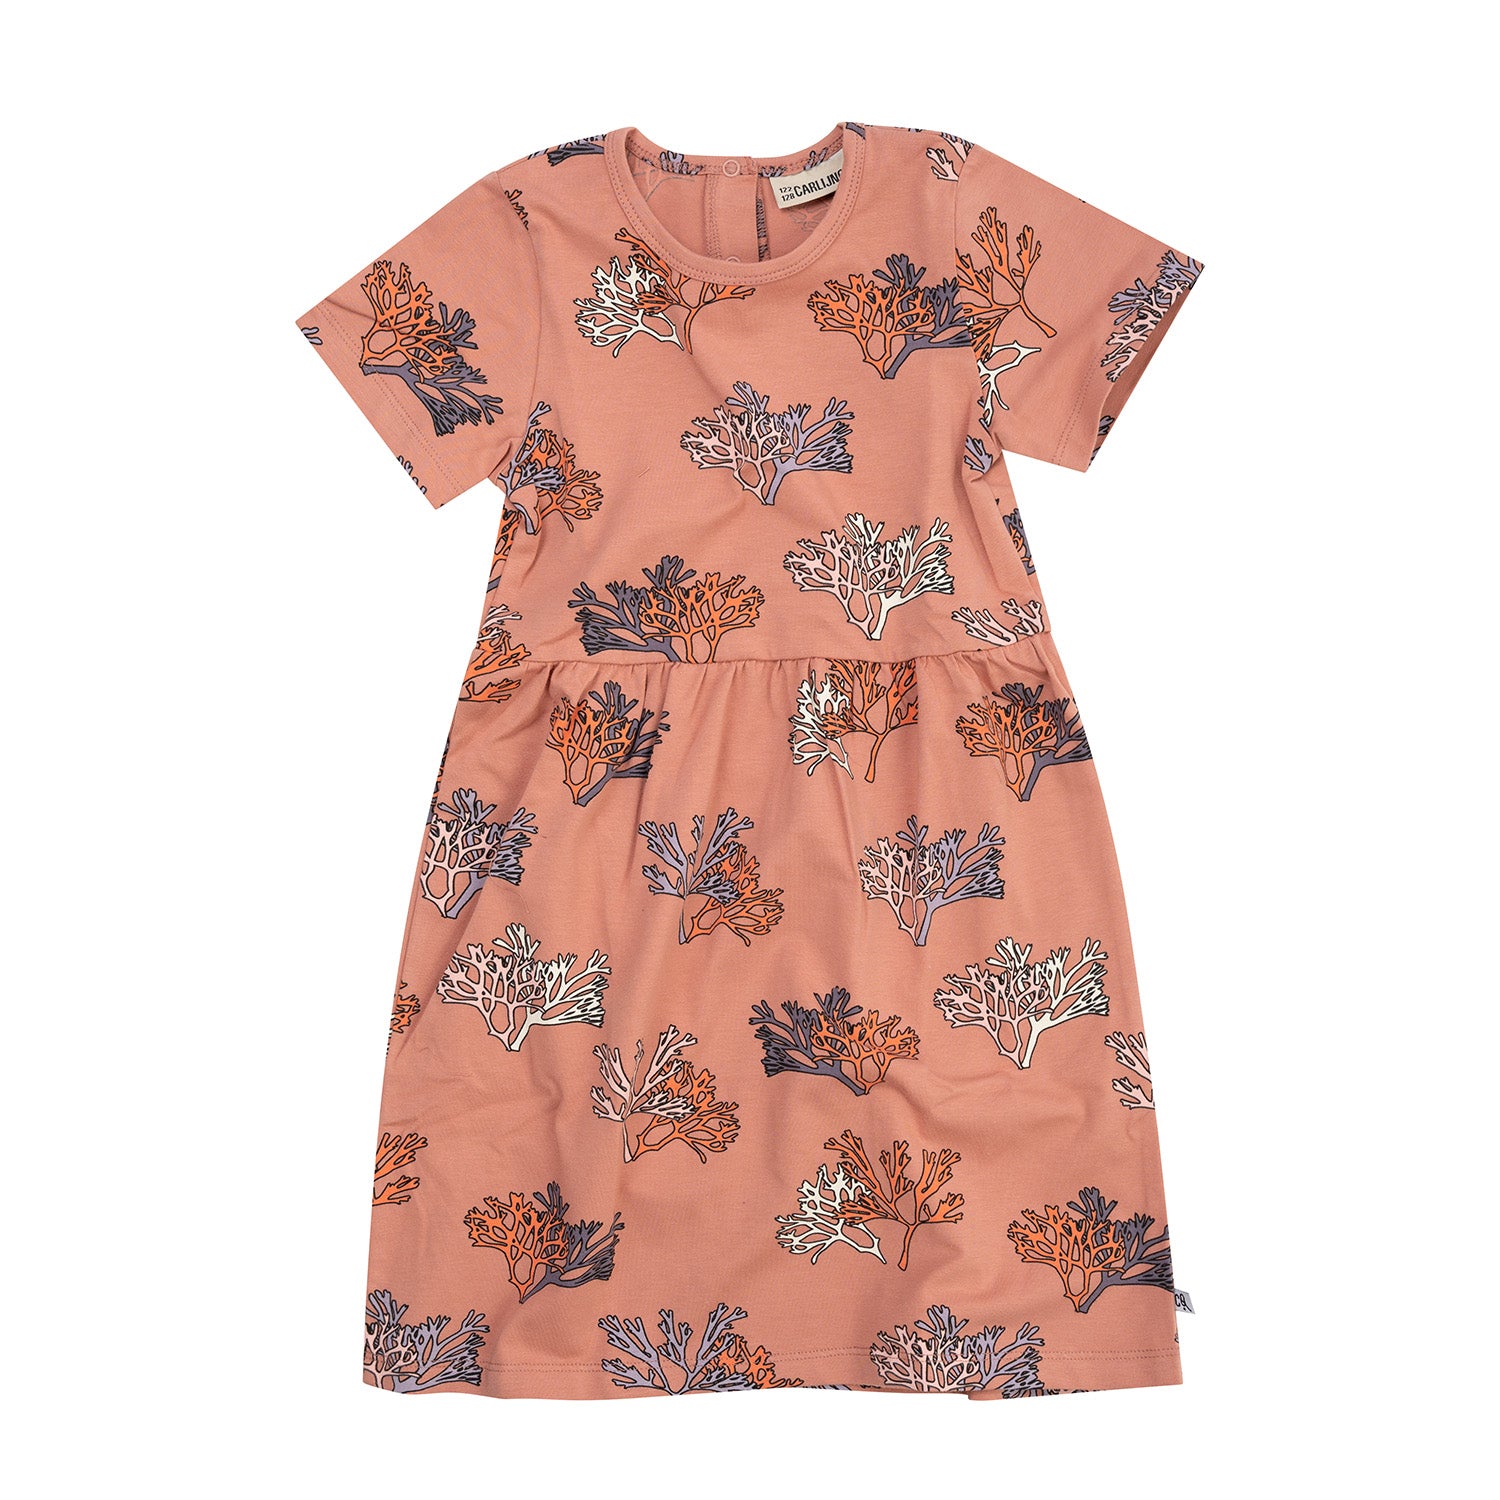 A flatlay of a pink dress with short sleeves and a print of sea coral.